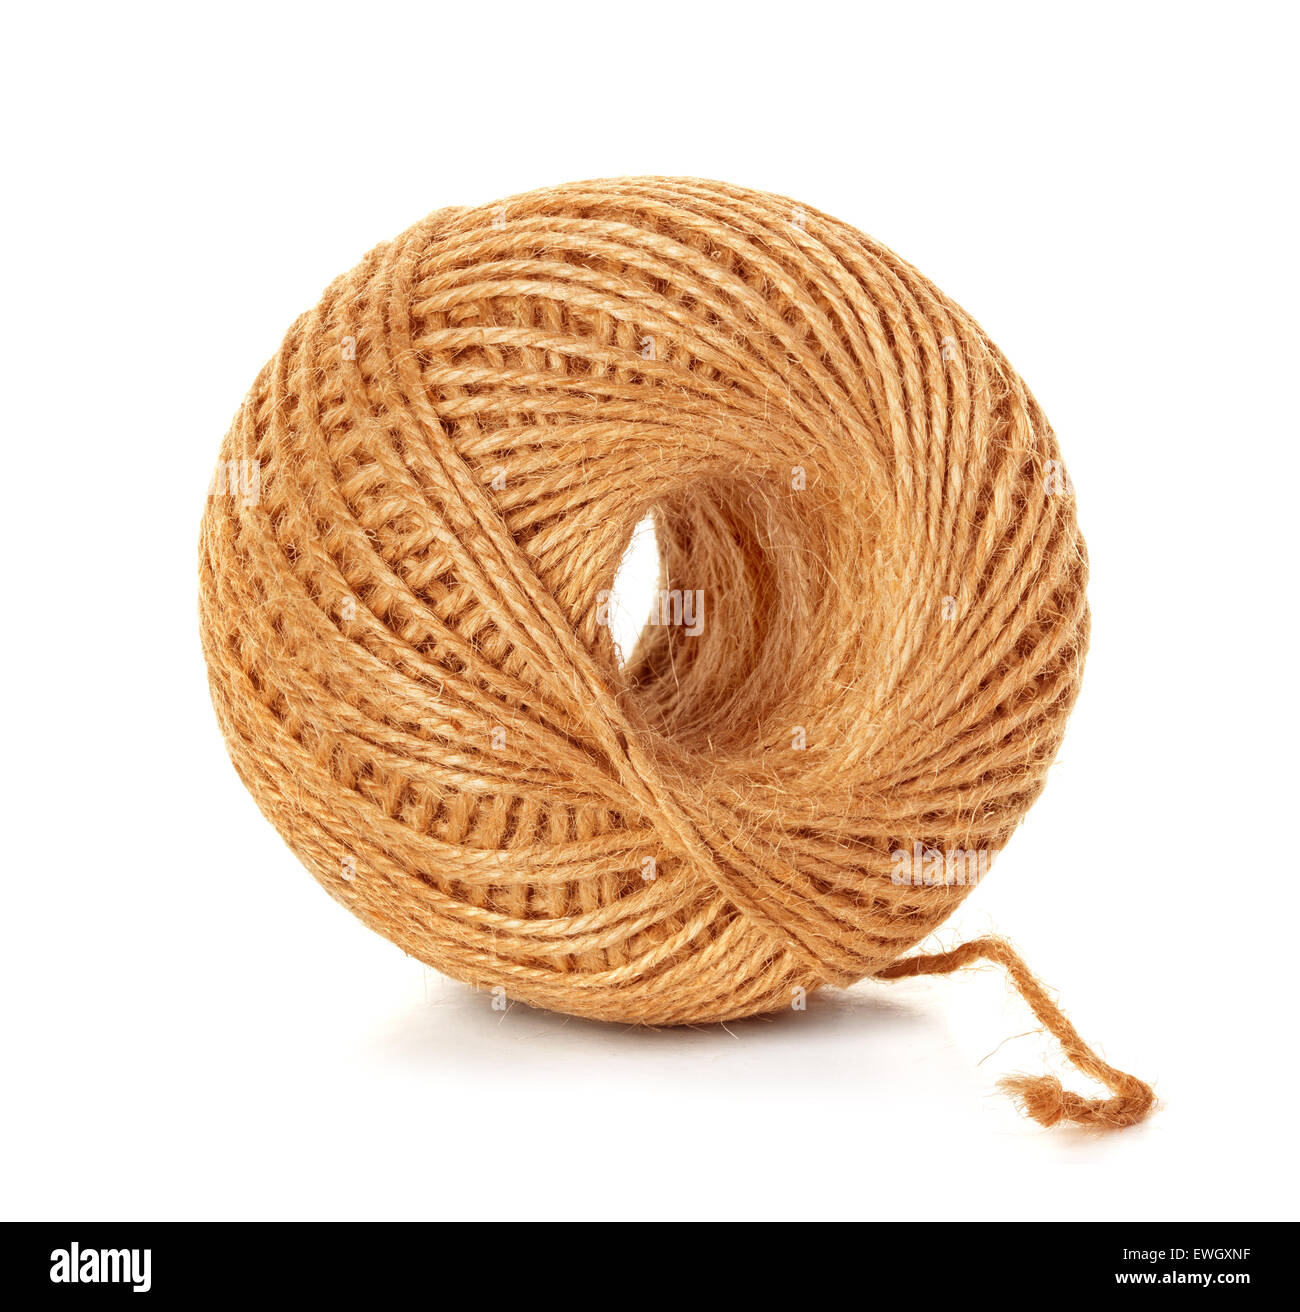 Jute String, Photography Supply, Packaging Ideas